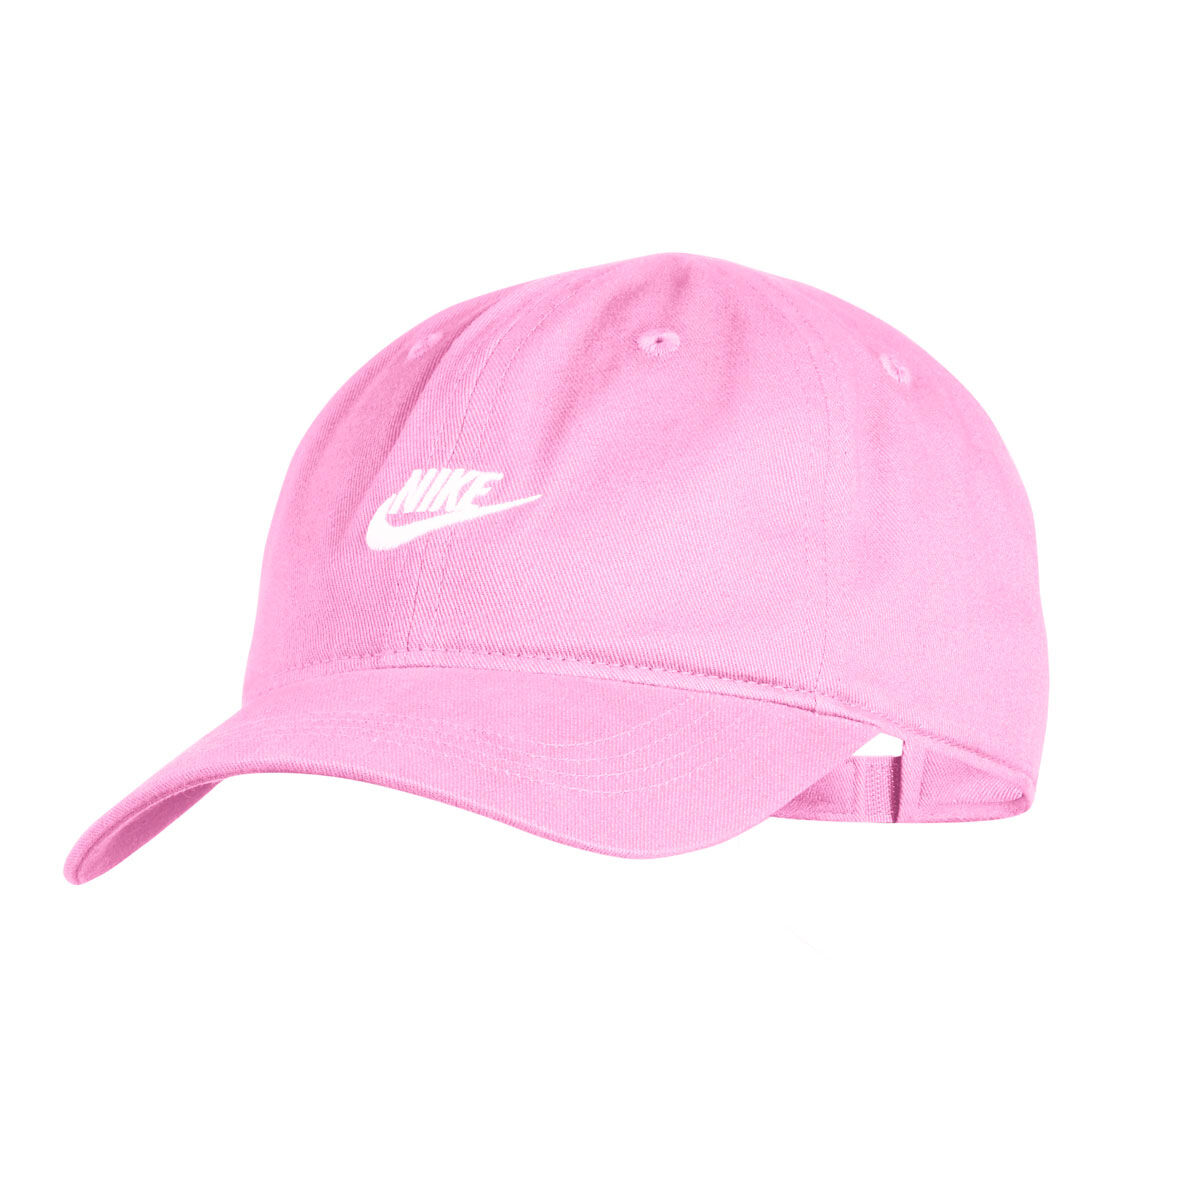 Primark hat and cap discount 50% WOMEN FASHION Accessories Hat and cap Pink Pink Single 